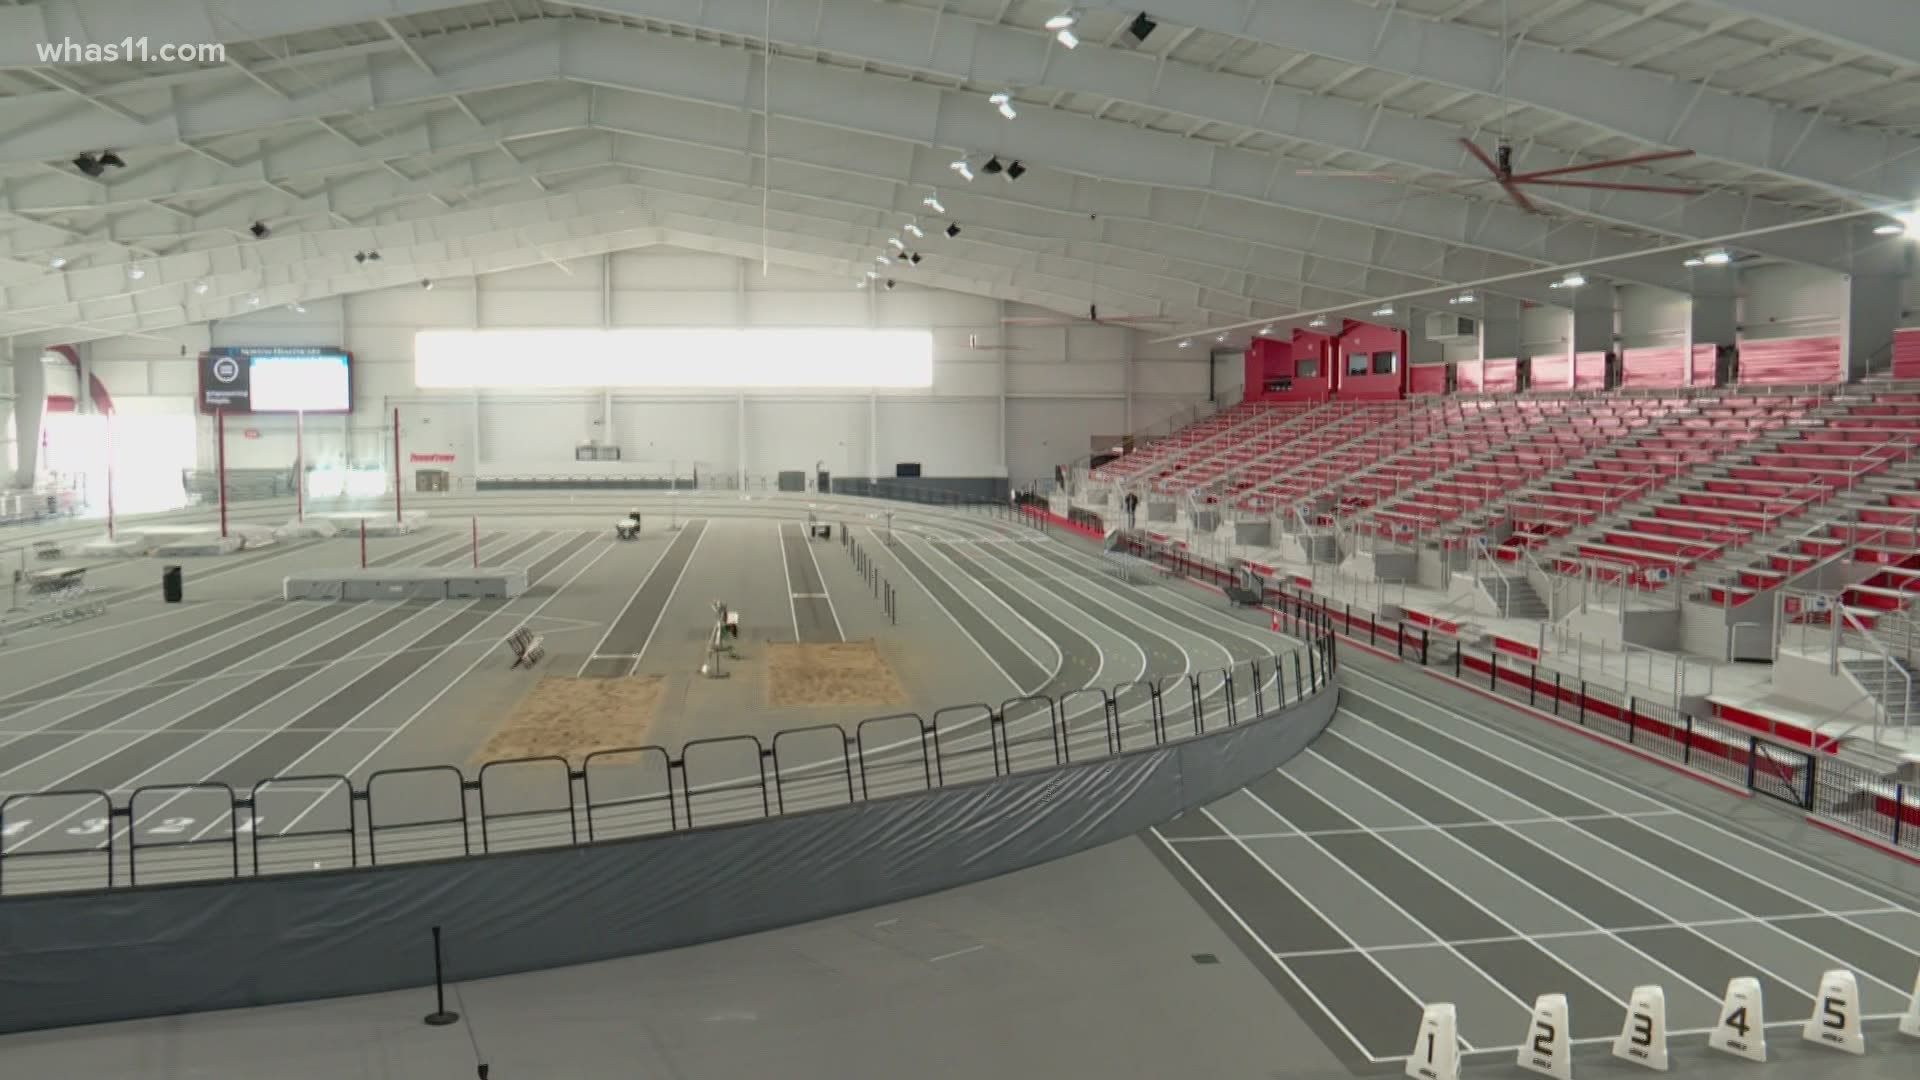 The new track and field facility in West Louisville received a $10 million loan from a group of community banks to help fill the project's funding gap.